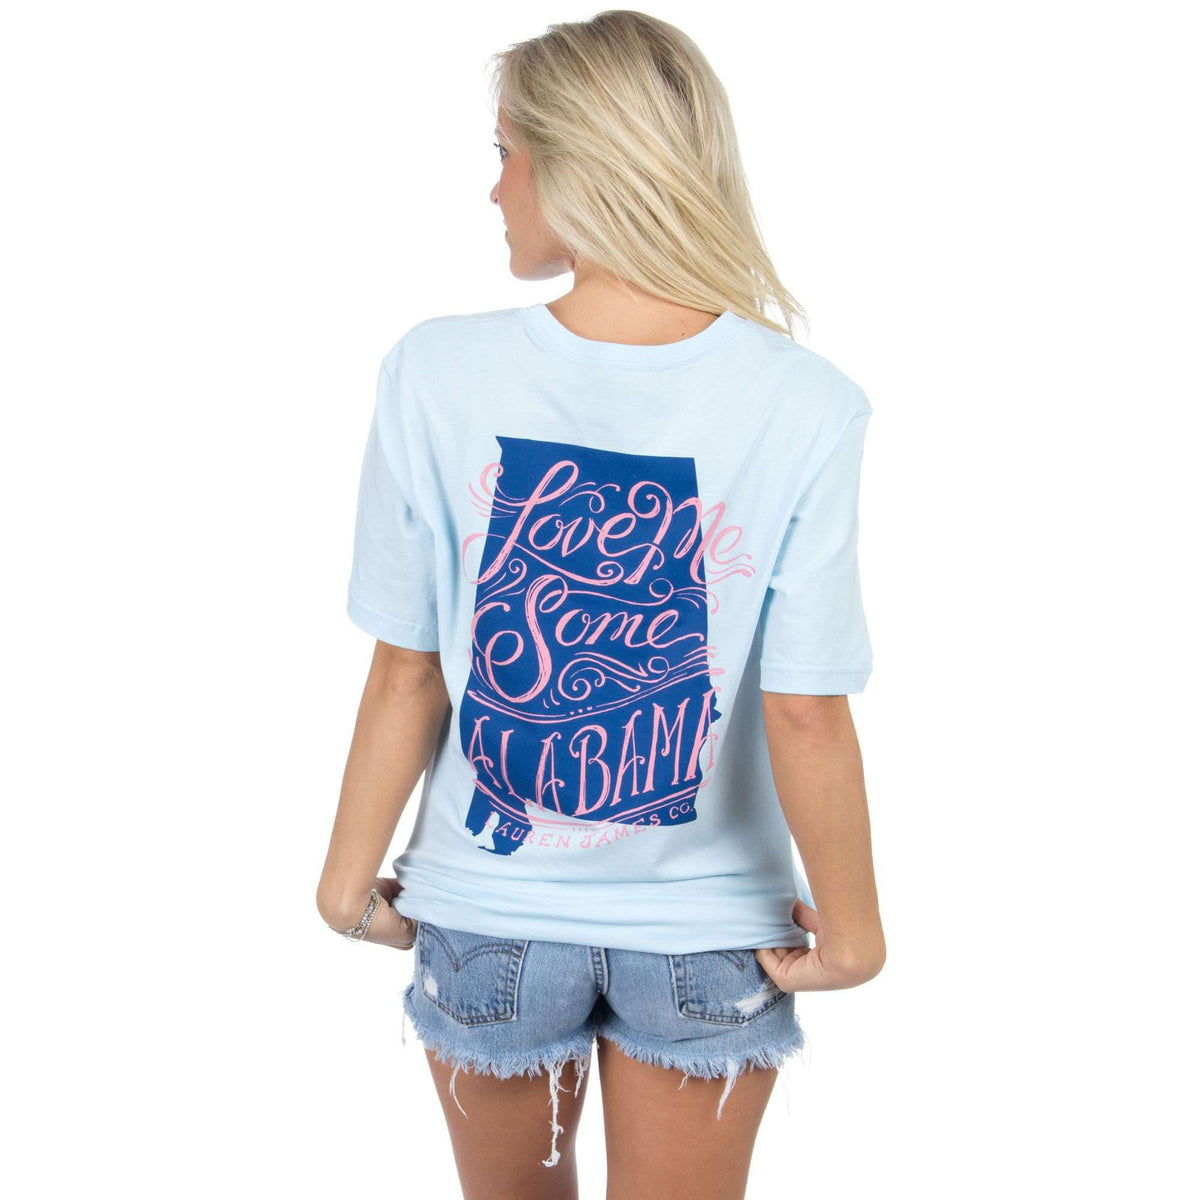 Love Me Some Alabama Tee in Light Blue by Lauren James - Country Club Prep